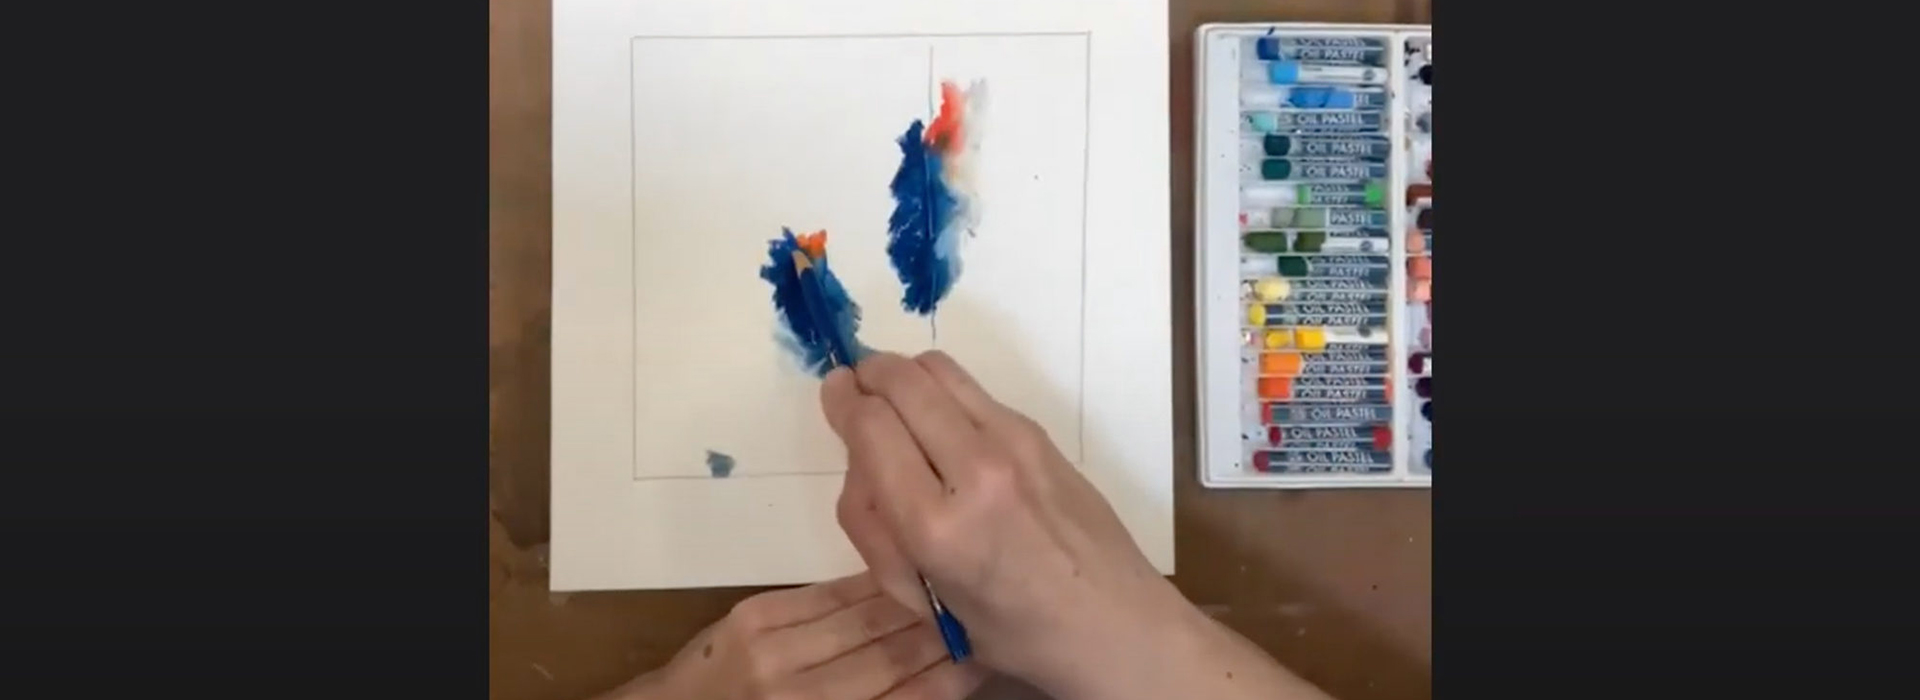 Looking down at a woman's hands on a screen as she draws with colored pencil and pastels